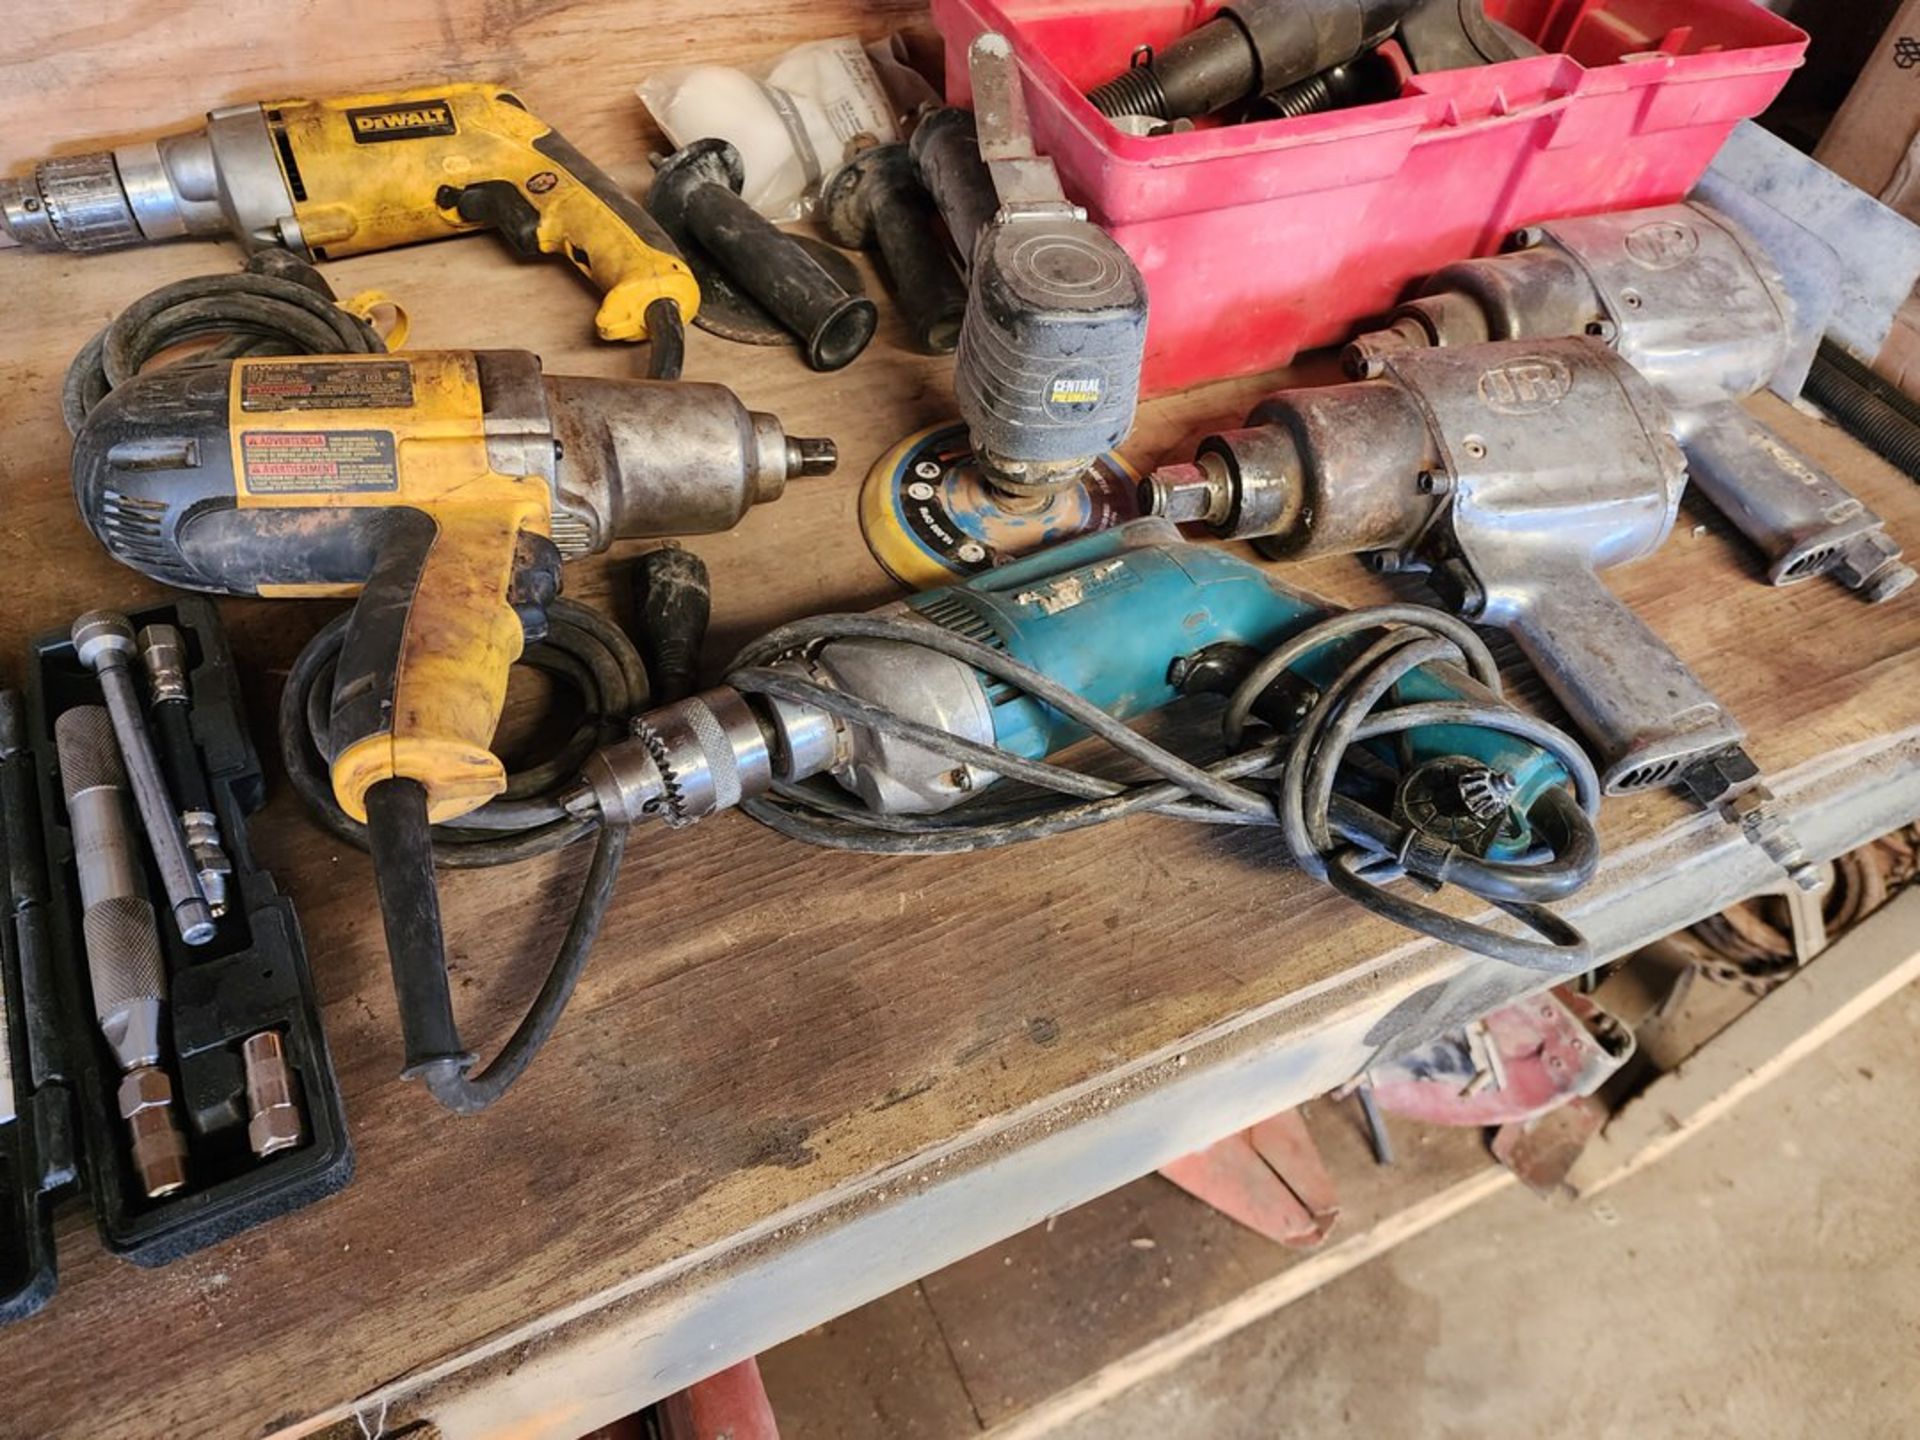 Contents Of Rack To Include But Not Limited To: (Welder Excluded) Assorted Power Tools; Drills; - Image 10 of 49